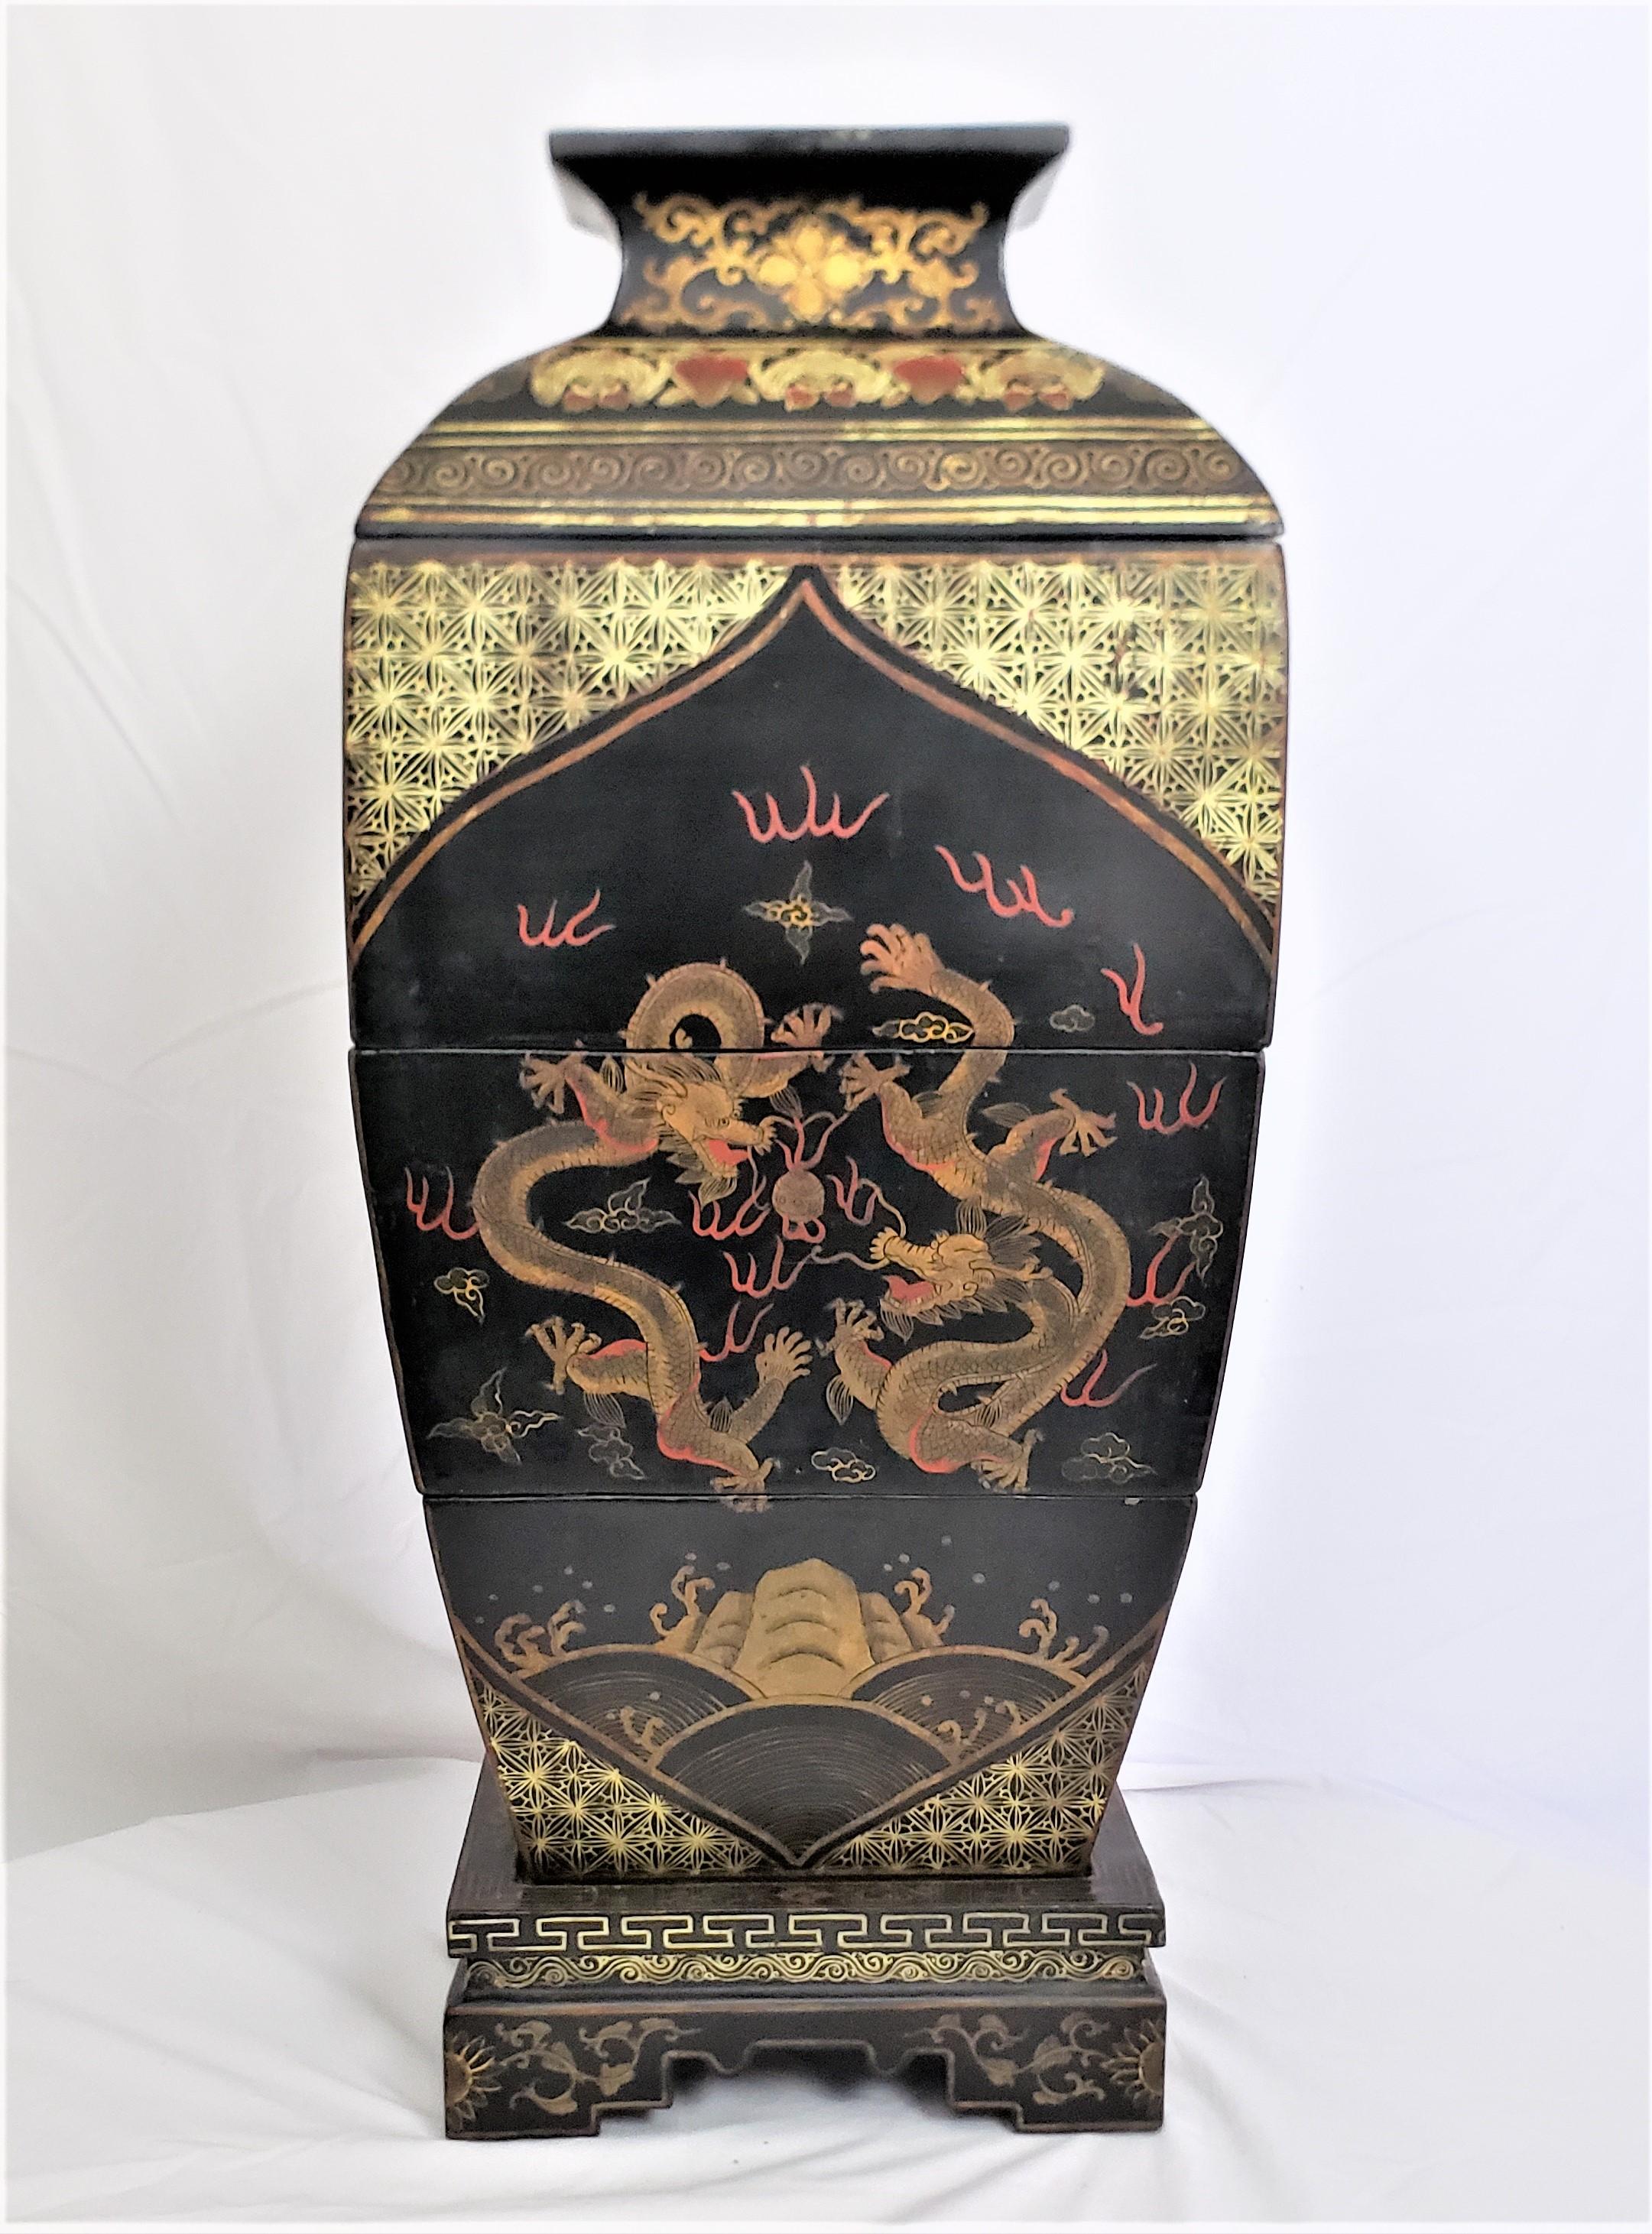 Softwood Antique Early Chinese Republic Era Stacking Lacquered Box Set with Dragon Motif For Sale